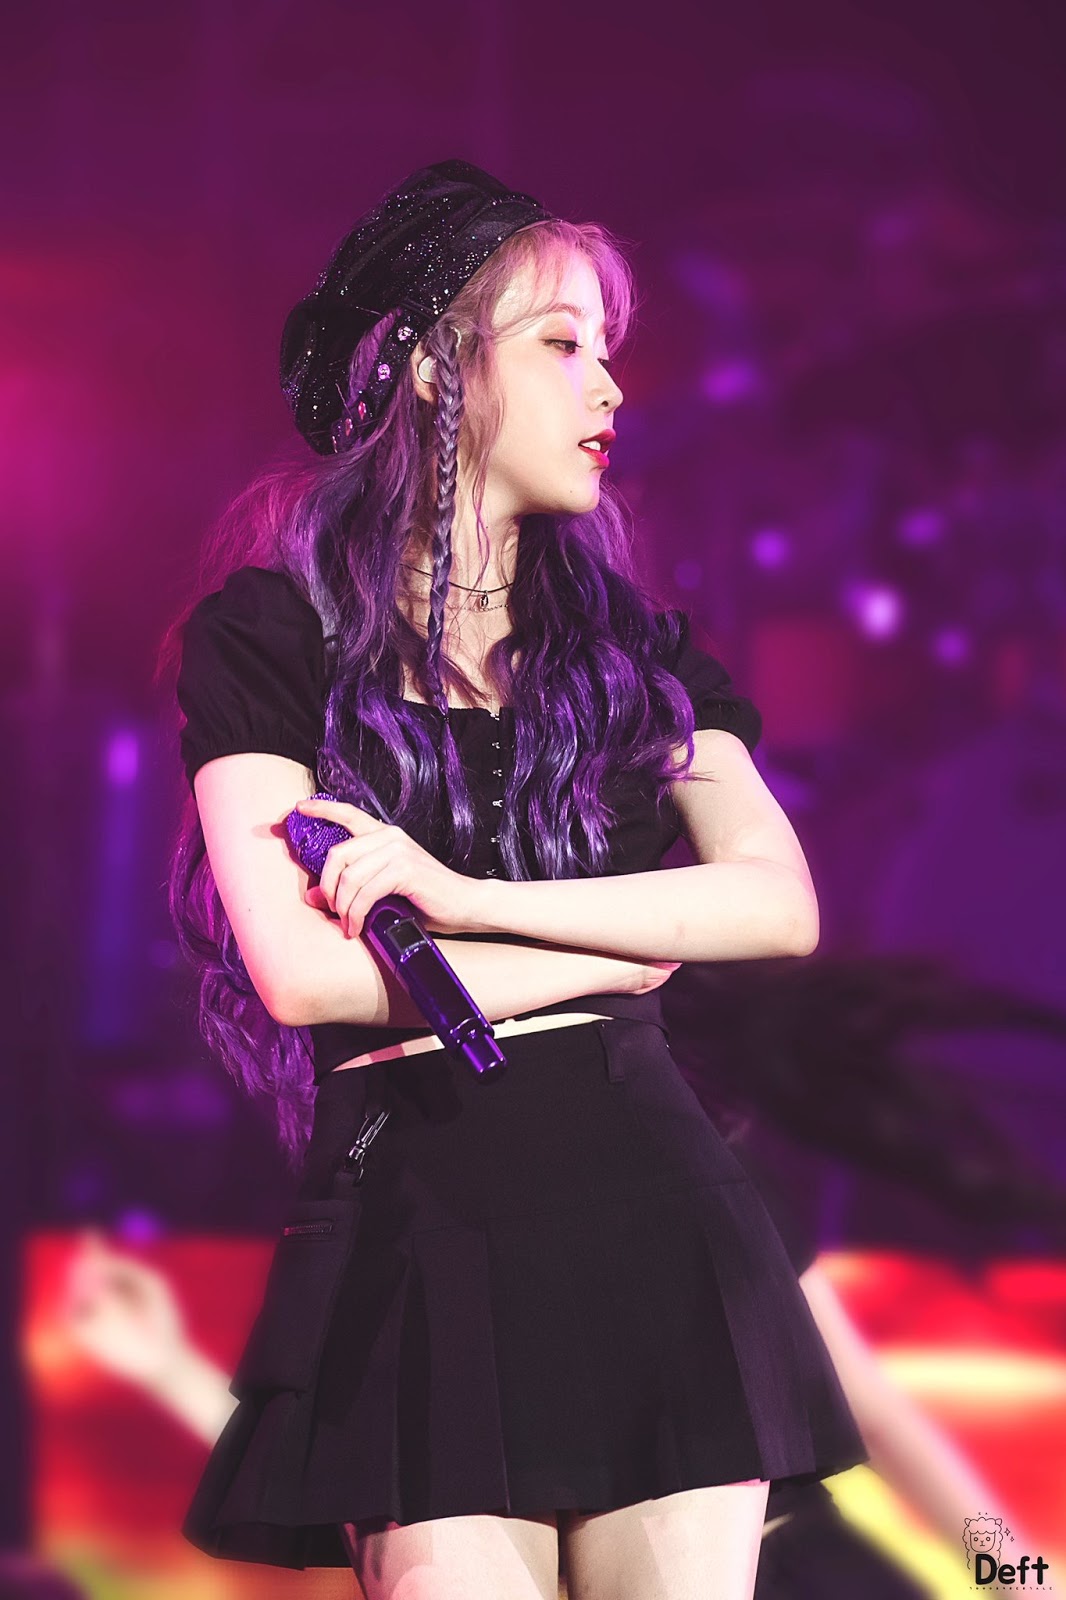 Knetz agree Singer IU looks the best with purple hair and wish to see